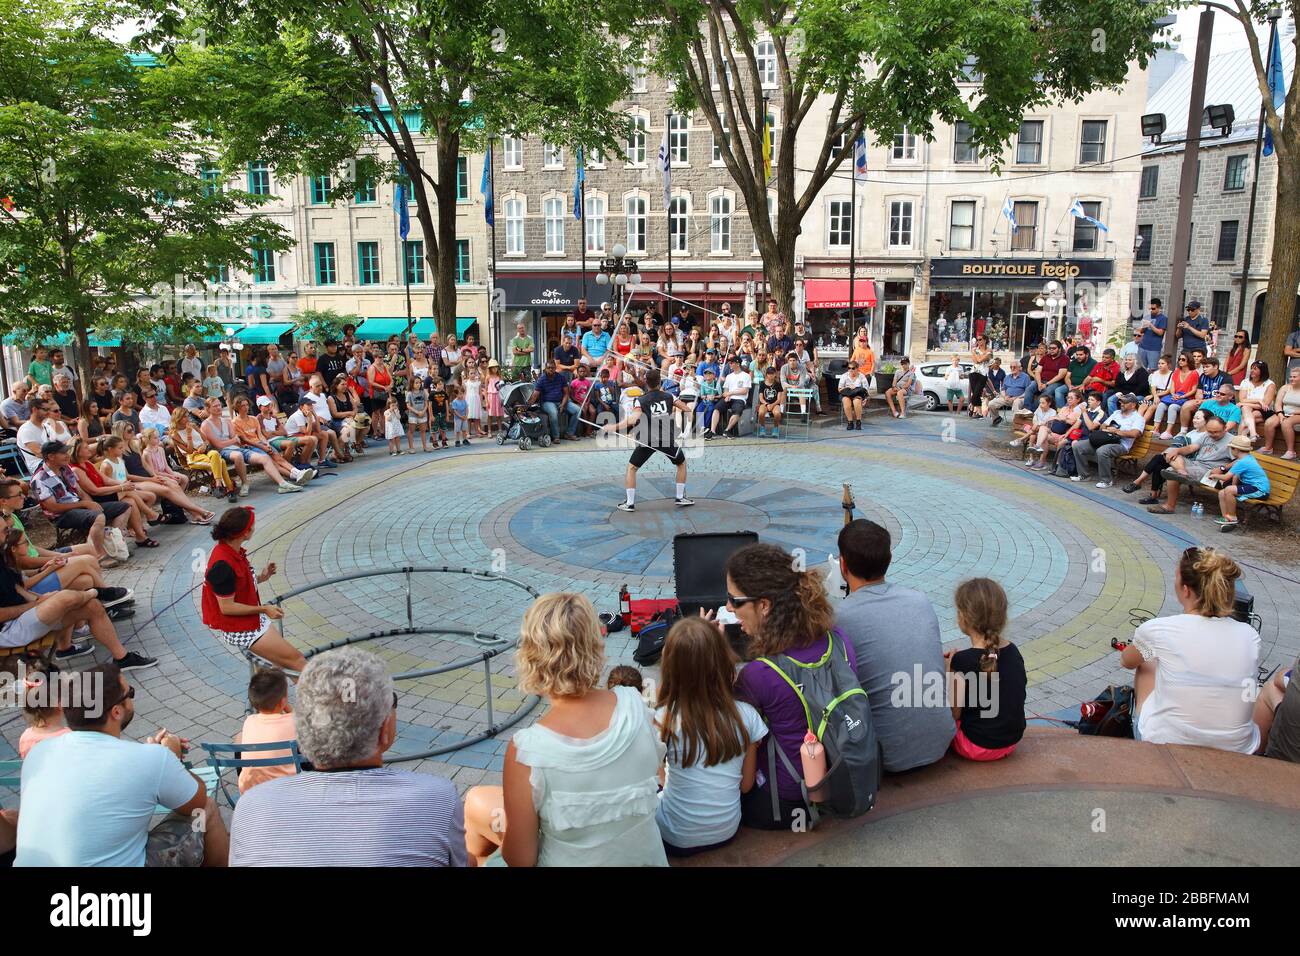 Crowd of people watching a couple take turns performing acrobatic tricks at Place de l'Hotel de Ville in Old Quebec City, Province of Quebec, Canada Stock Photo